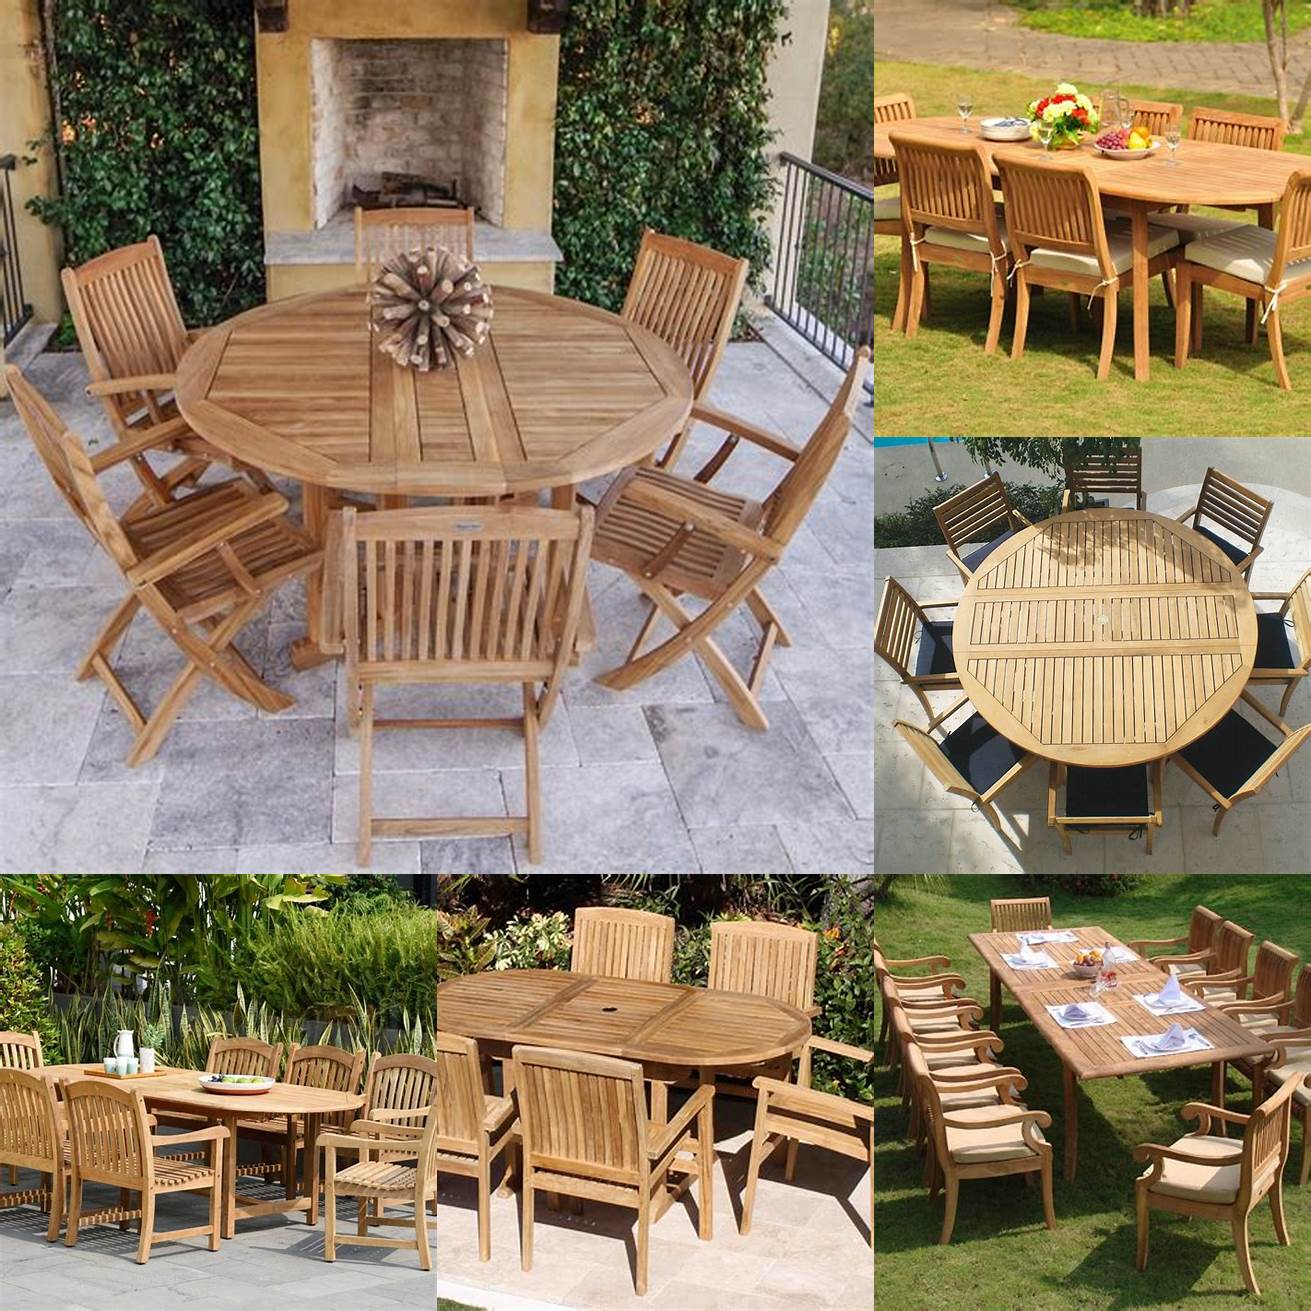 Questions to Ask a Teak Patio Furniture Supplier